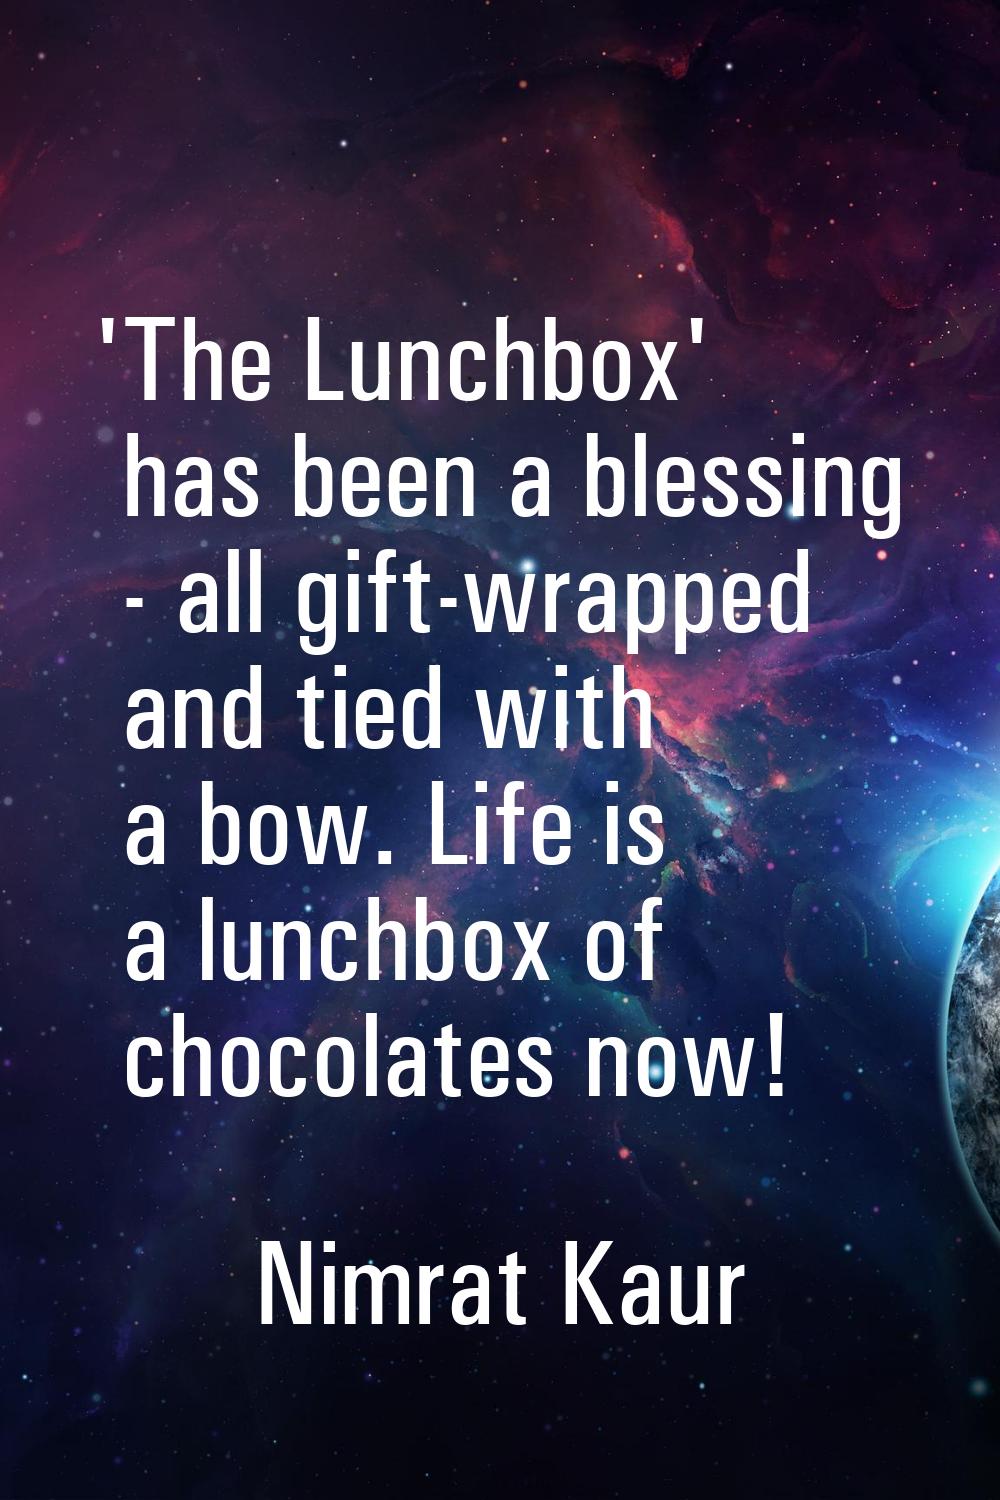 'The Lunchbox' has been a blessing - all gift-wrapped and tied with a bow. Life is a lunchbox of ch